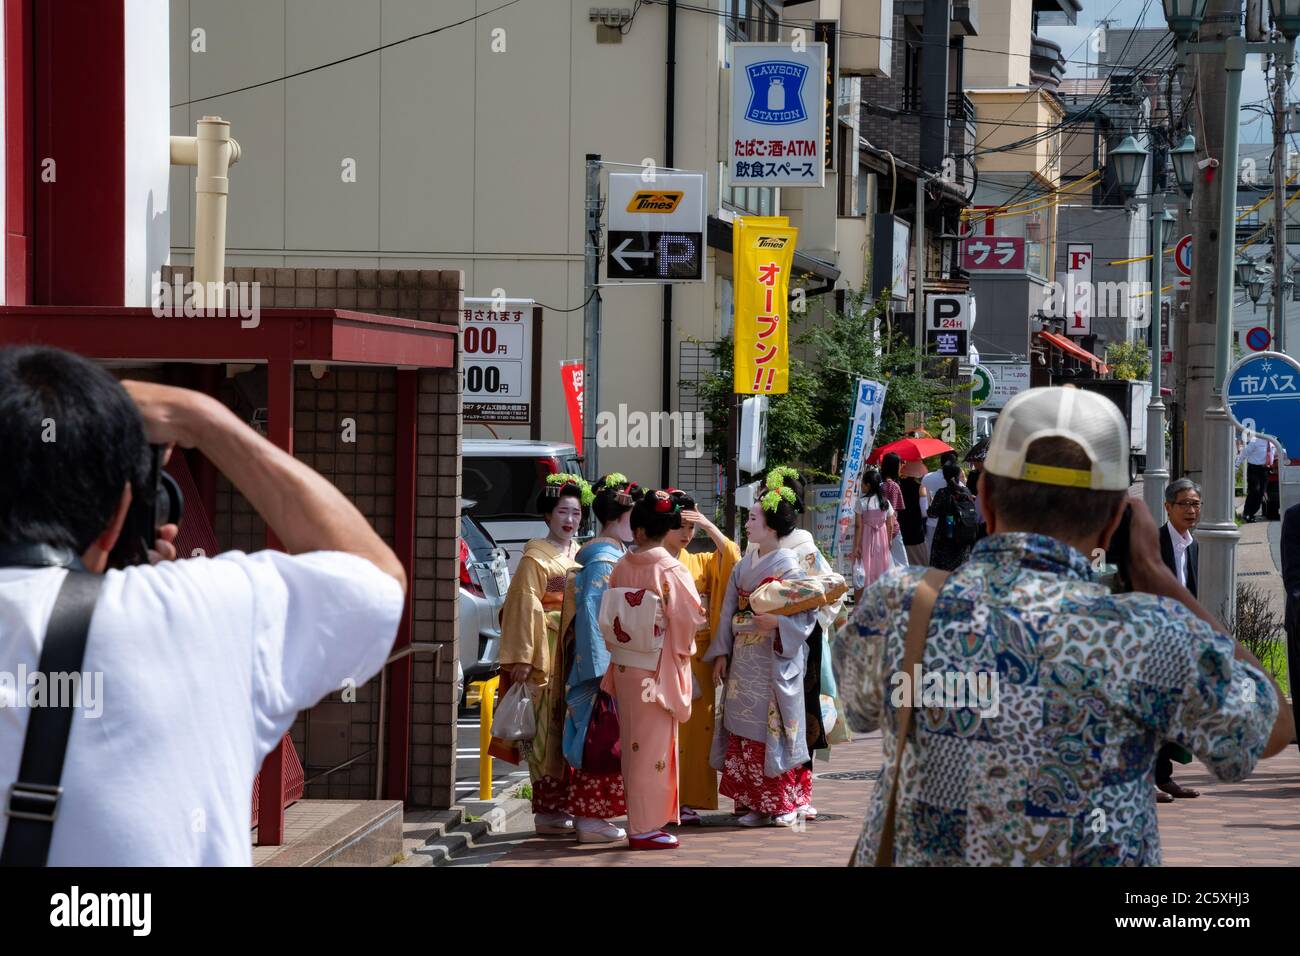 Group of maiko just outside Minami-za theater (the primary kabuki theatre in town) and paparazzi photographing them. Kyoto, Japan Stock Photo